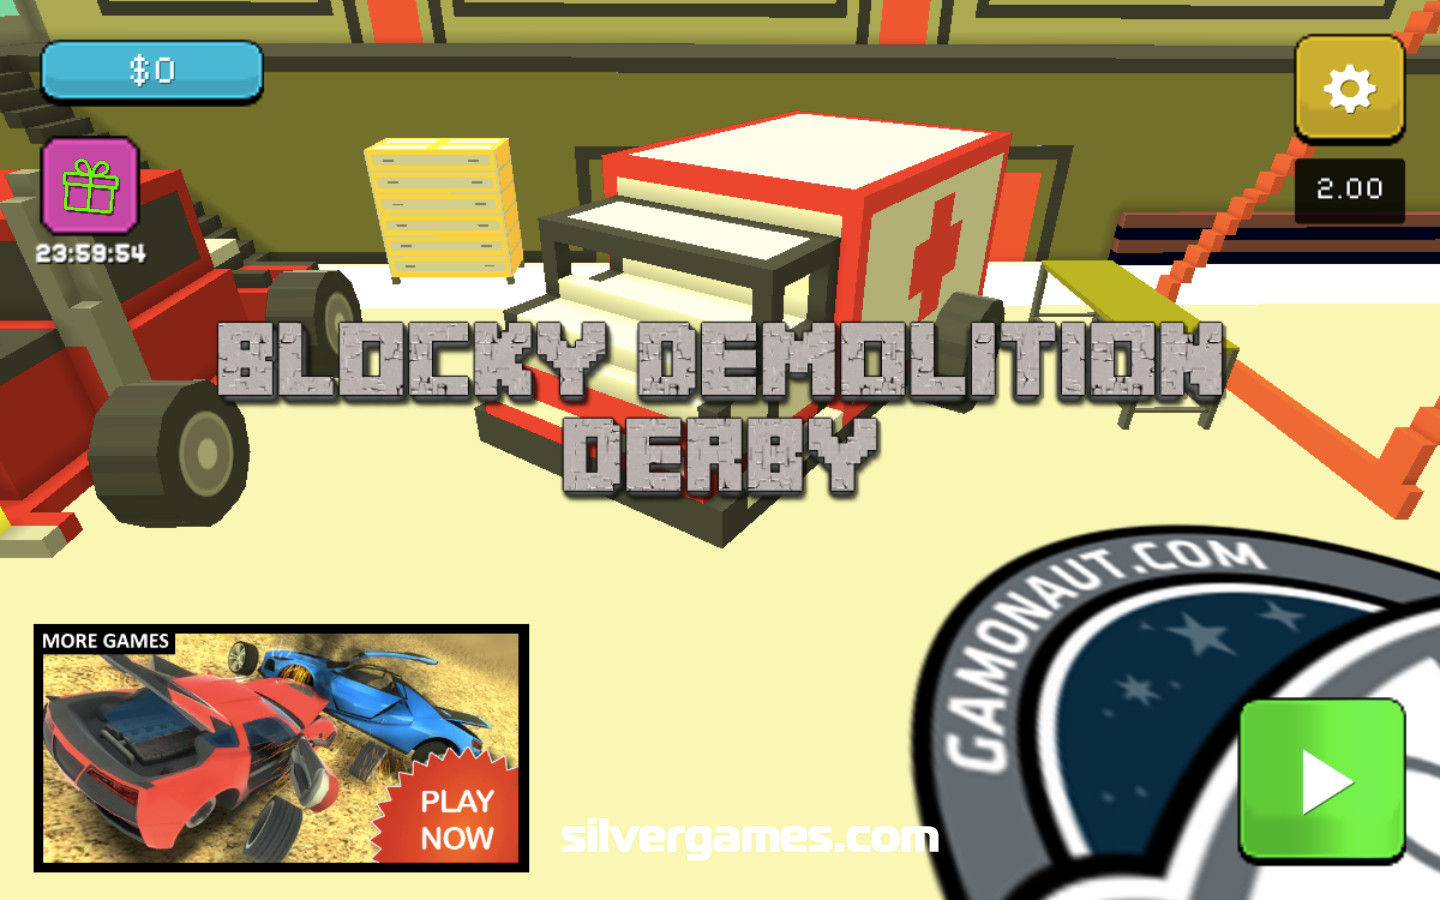 Demolition Car - Rope And Hook - Play Online on SilverGames 🕹️